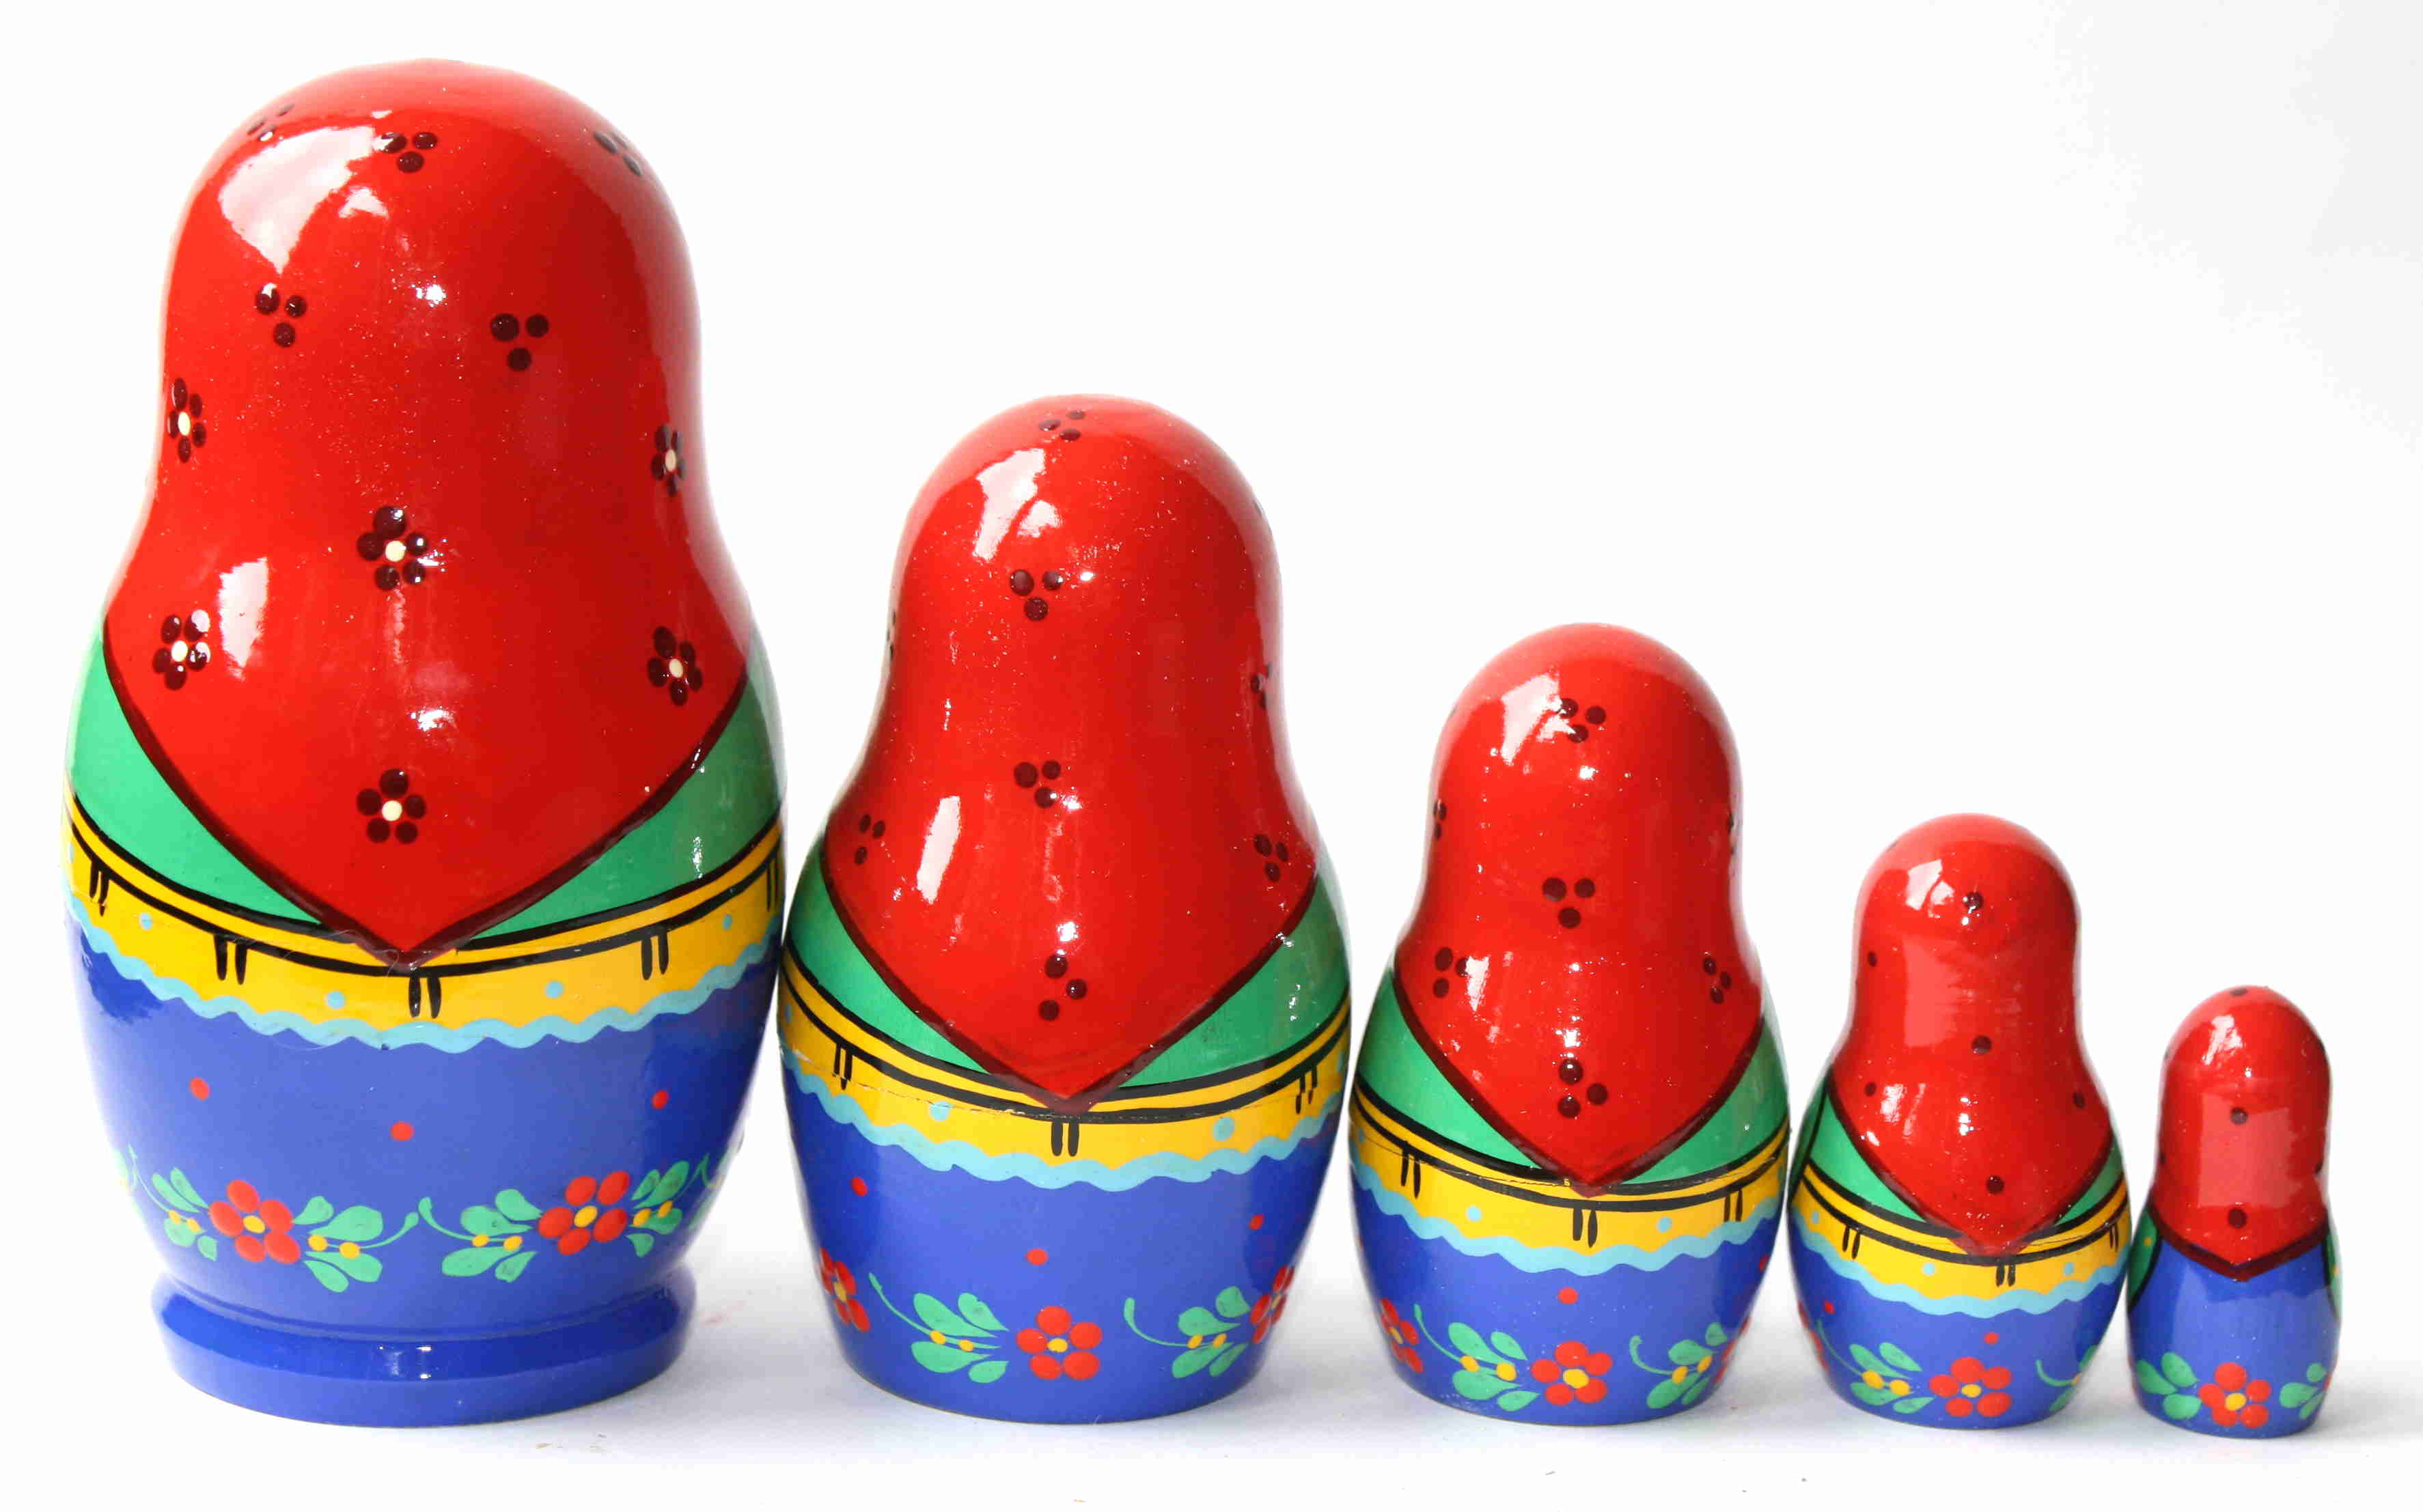 Artists Matryoshka Red & Green with Cat (5 nested set)